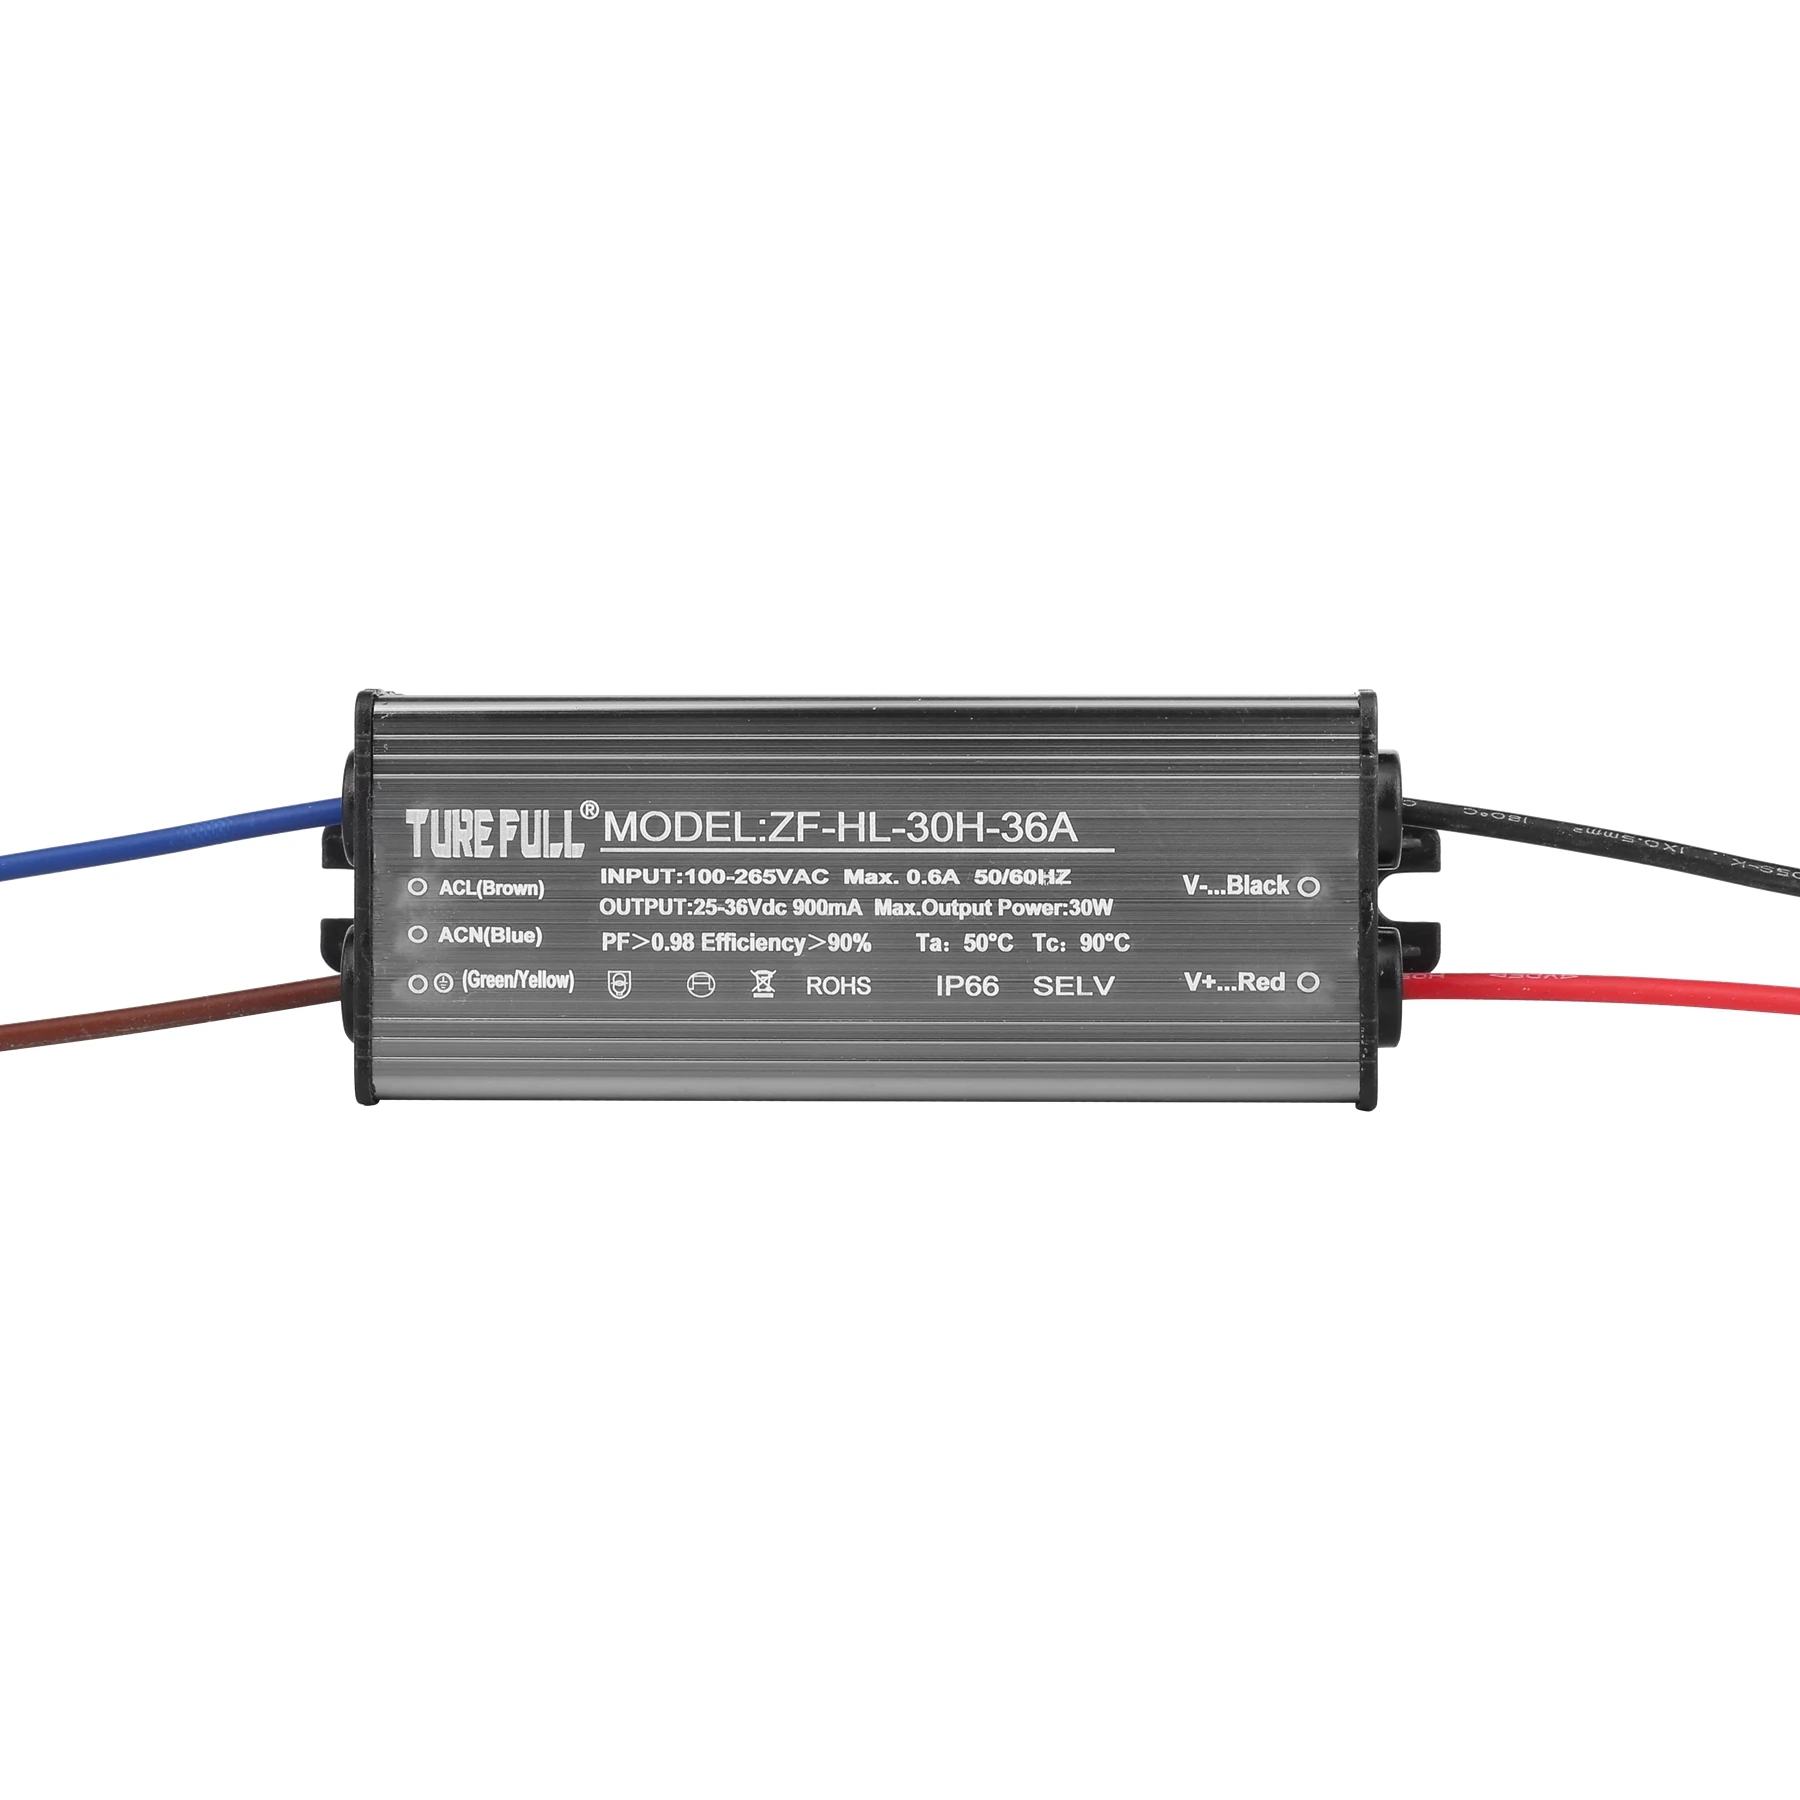 Aluminum Case 240ma Led Driver Lighting and Circuitry Design 1 - 50W 3-YEAR Single